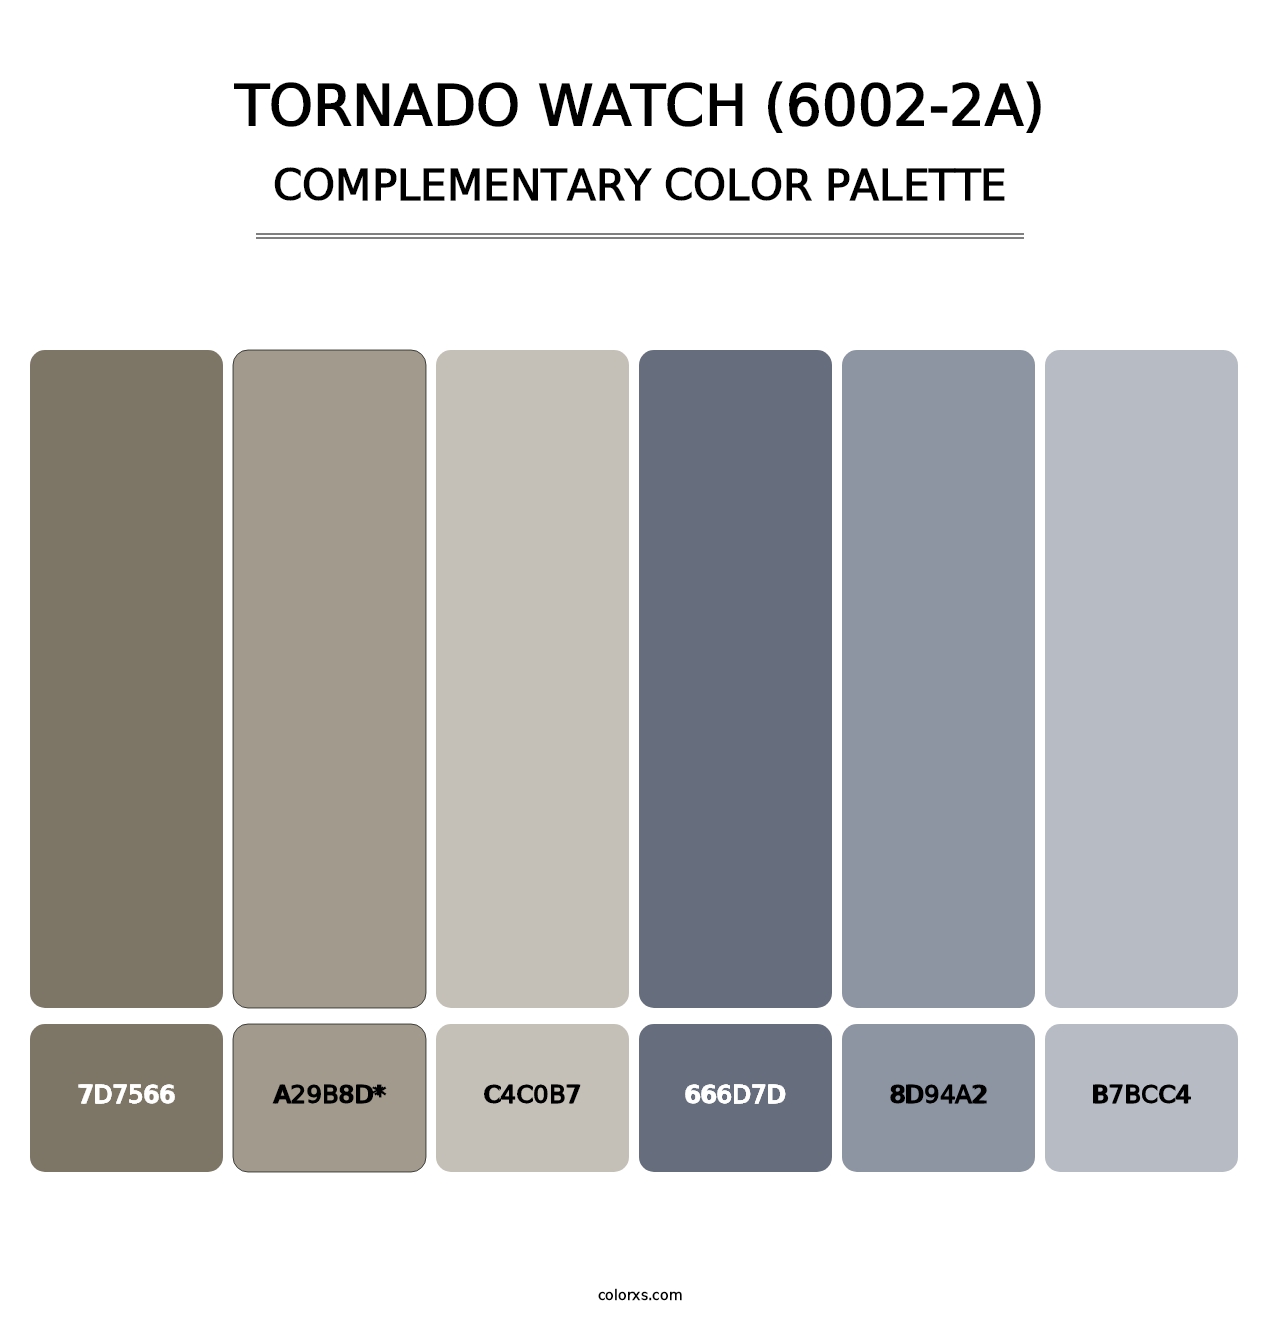 Tornado Watch (6002-2A) - Complementary Color Palette